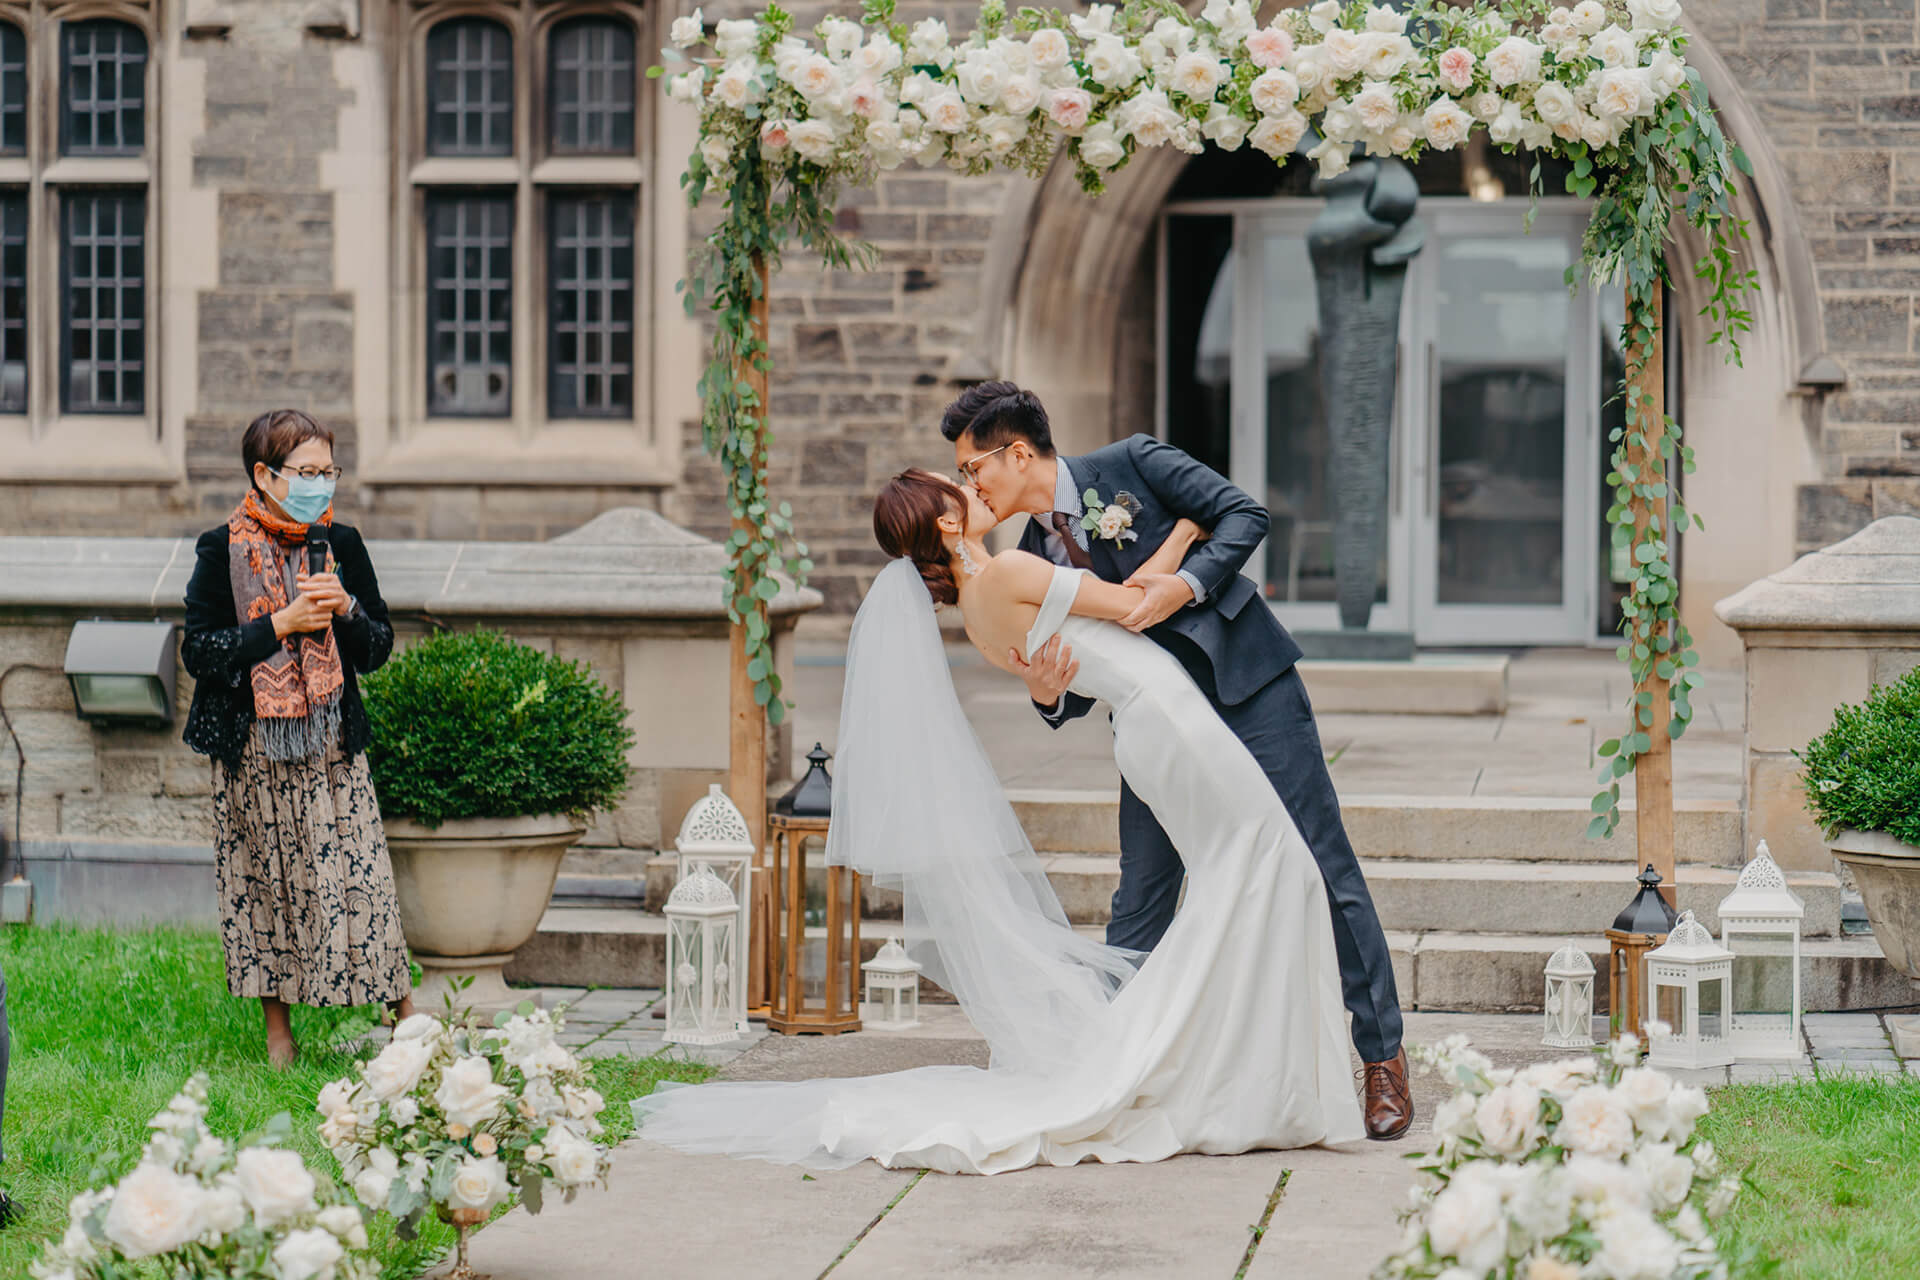 A couple has their first kiss after their vows, surrounded by flowers